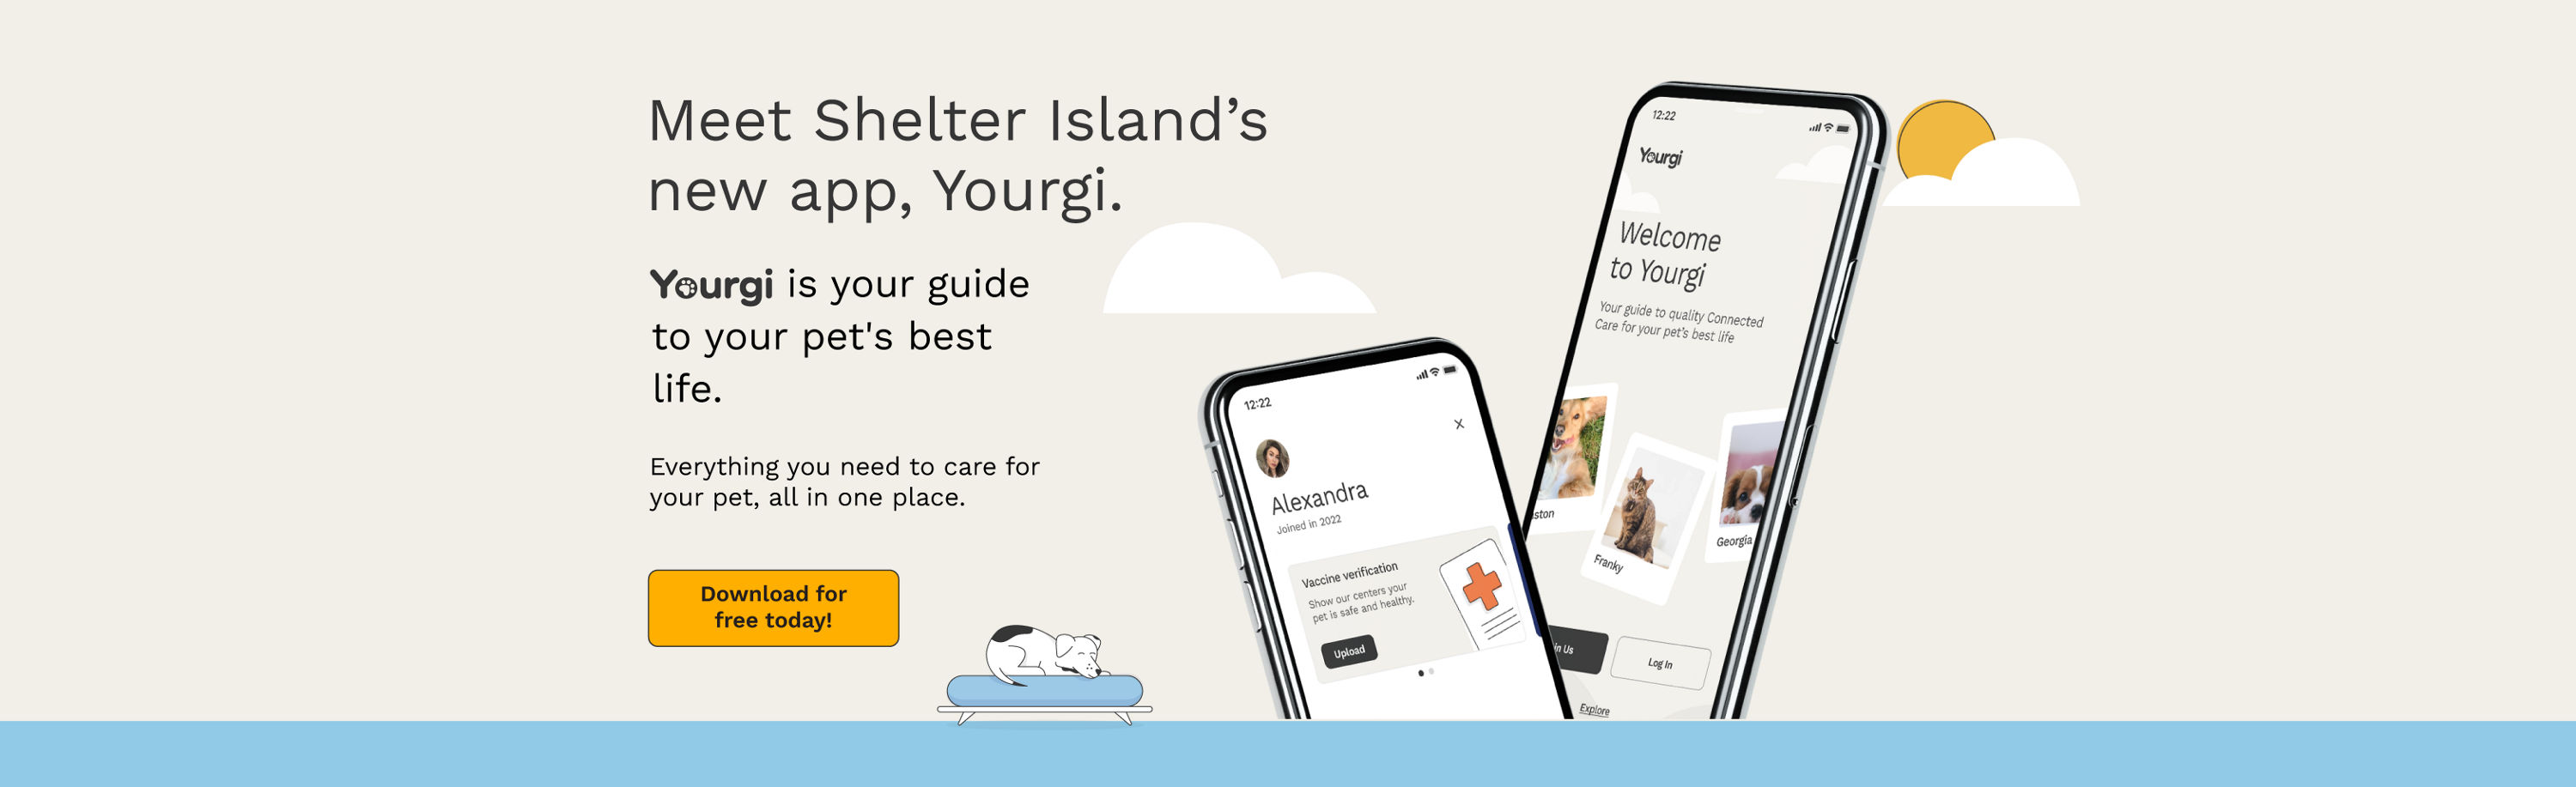 Meet Shelter Island's new app, Yourgi